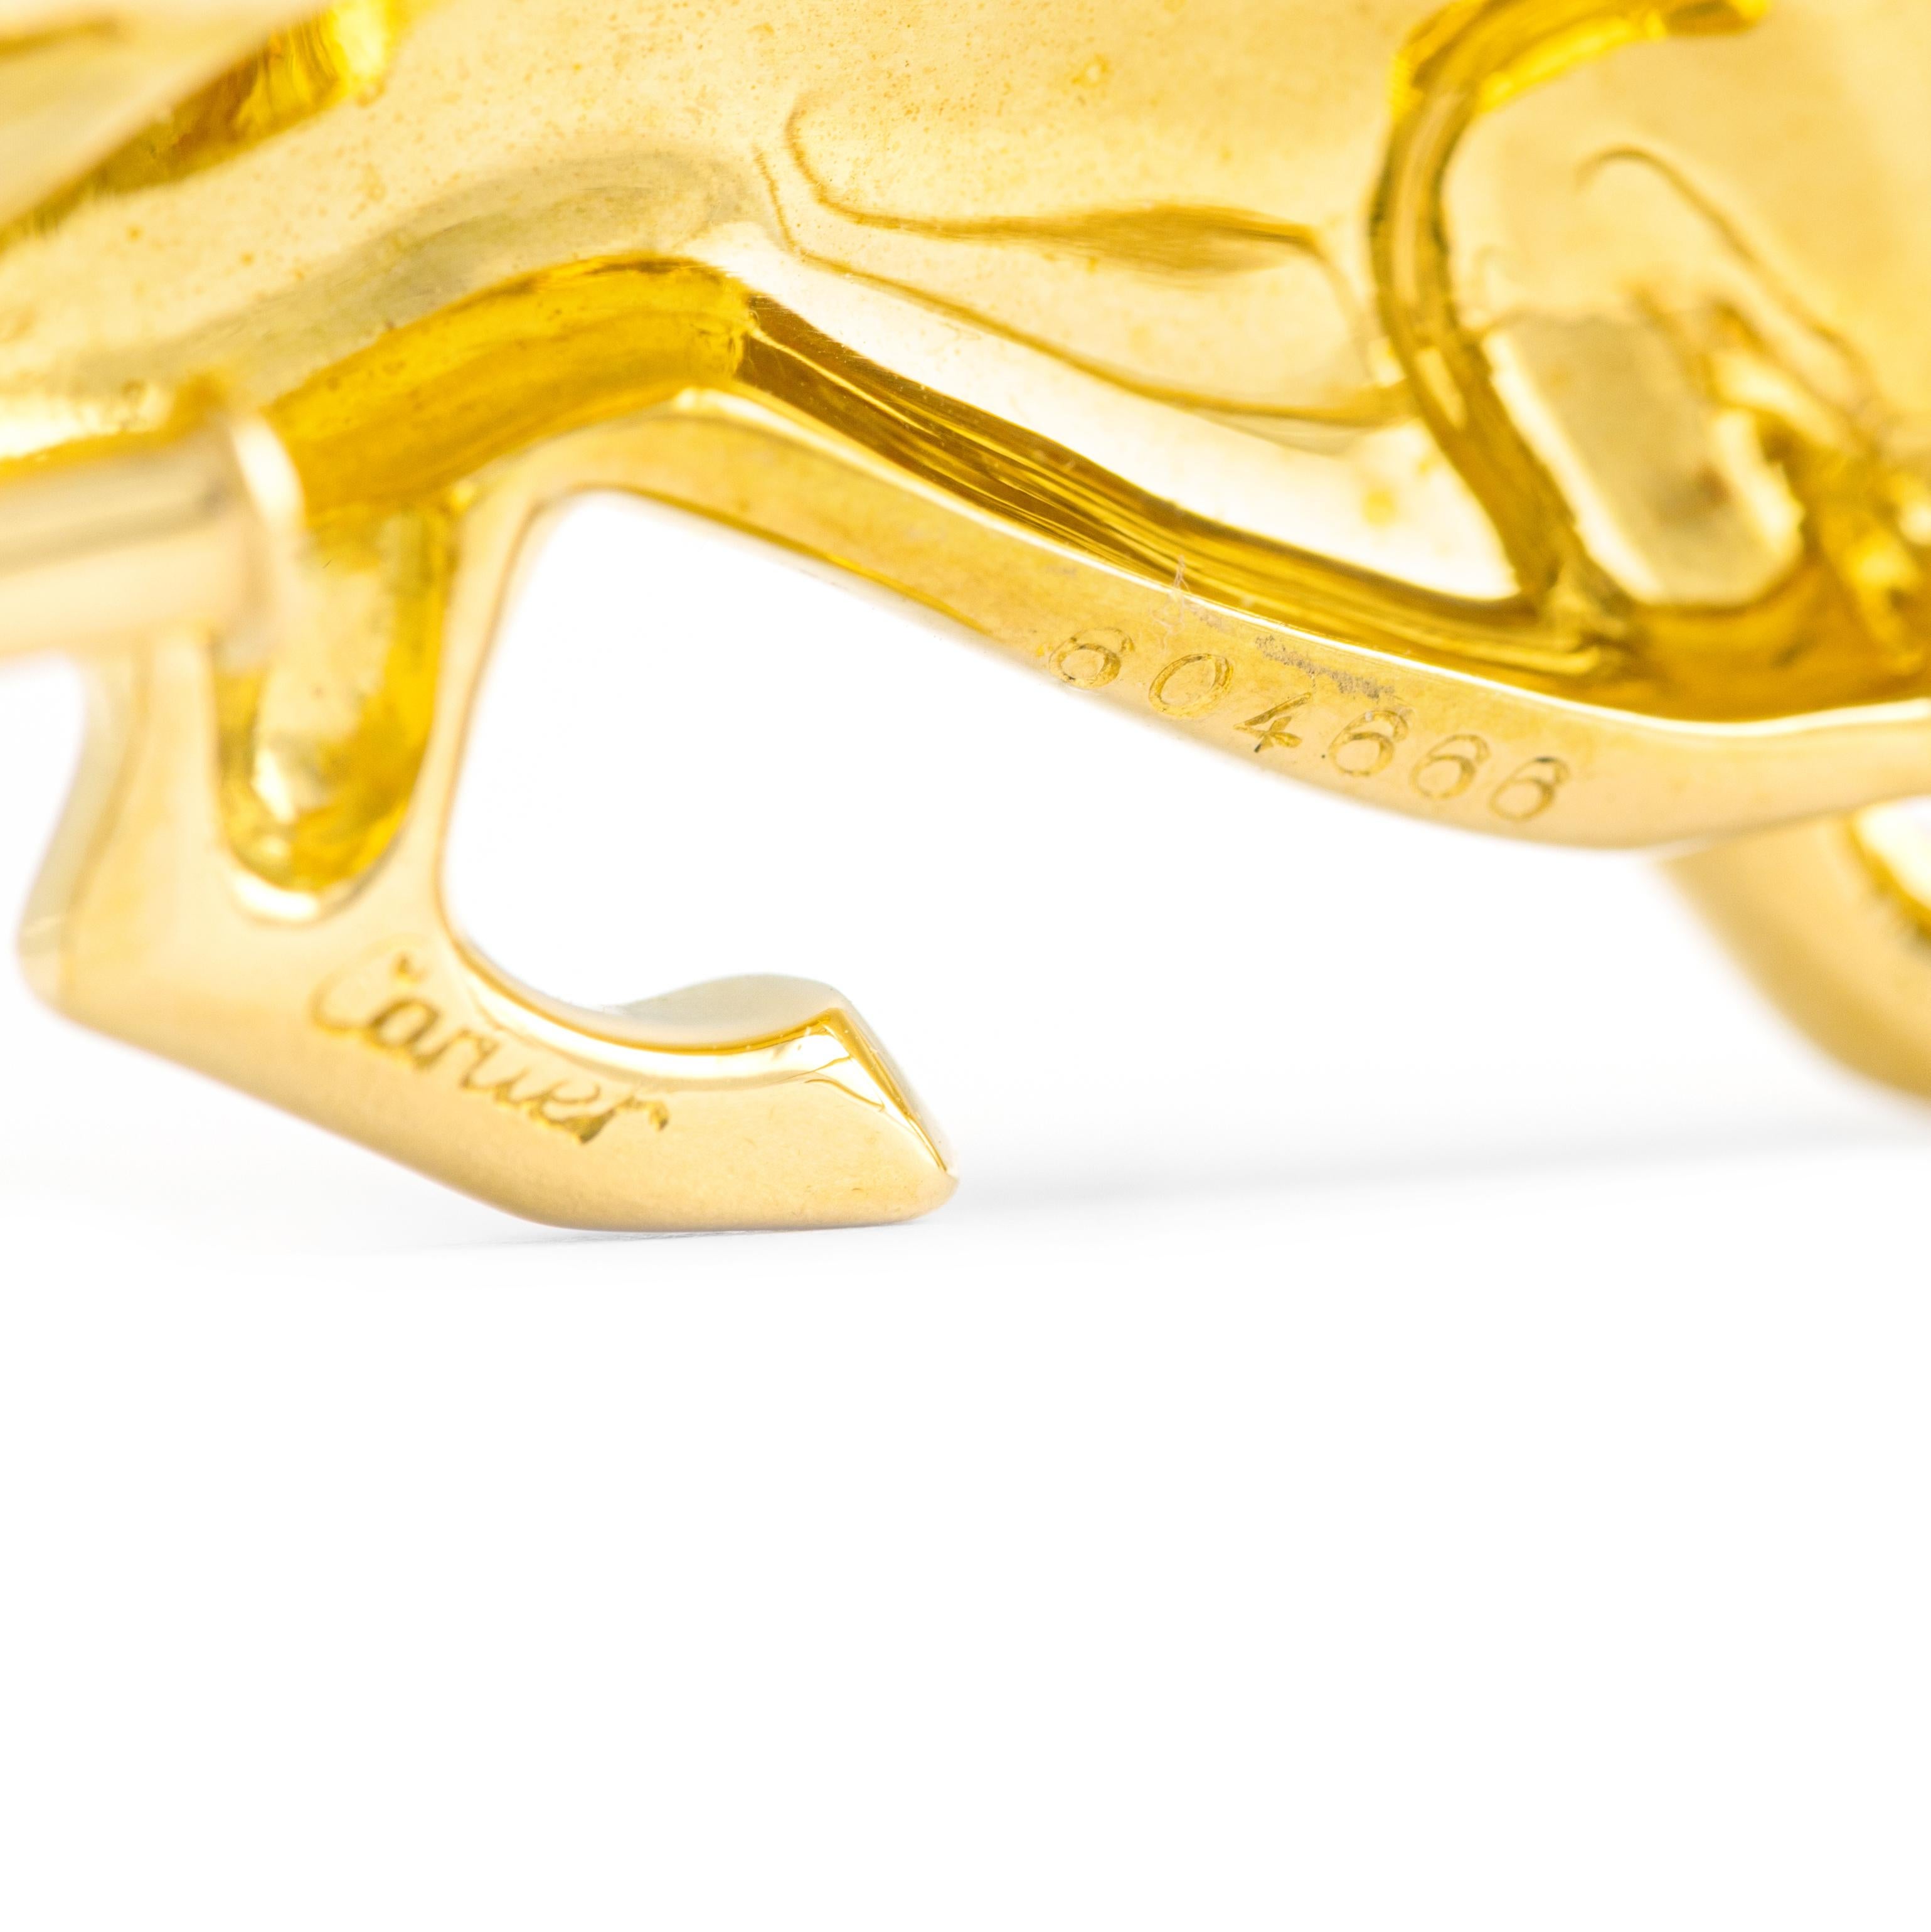 Women's or Men's Cartier Panther Yellow Gold Brooch For Sale